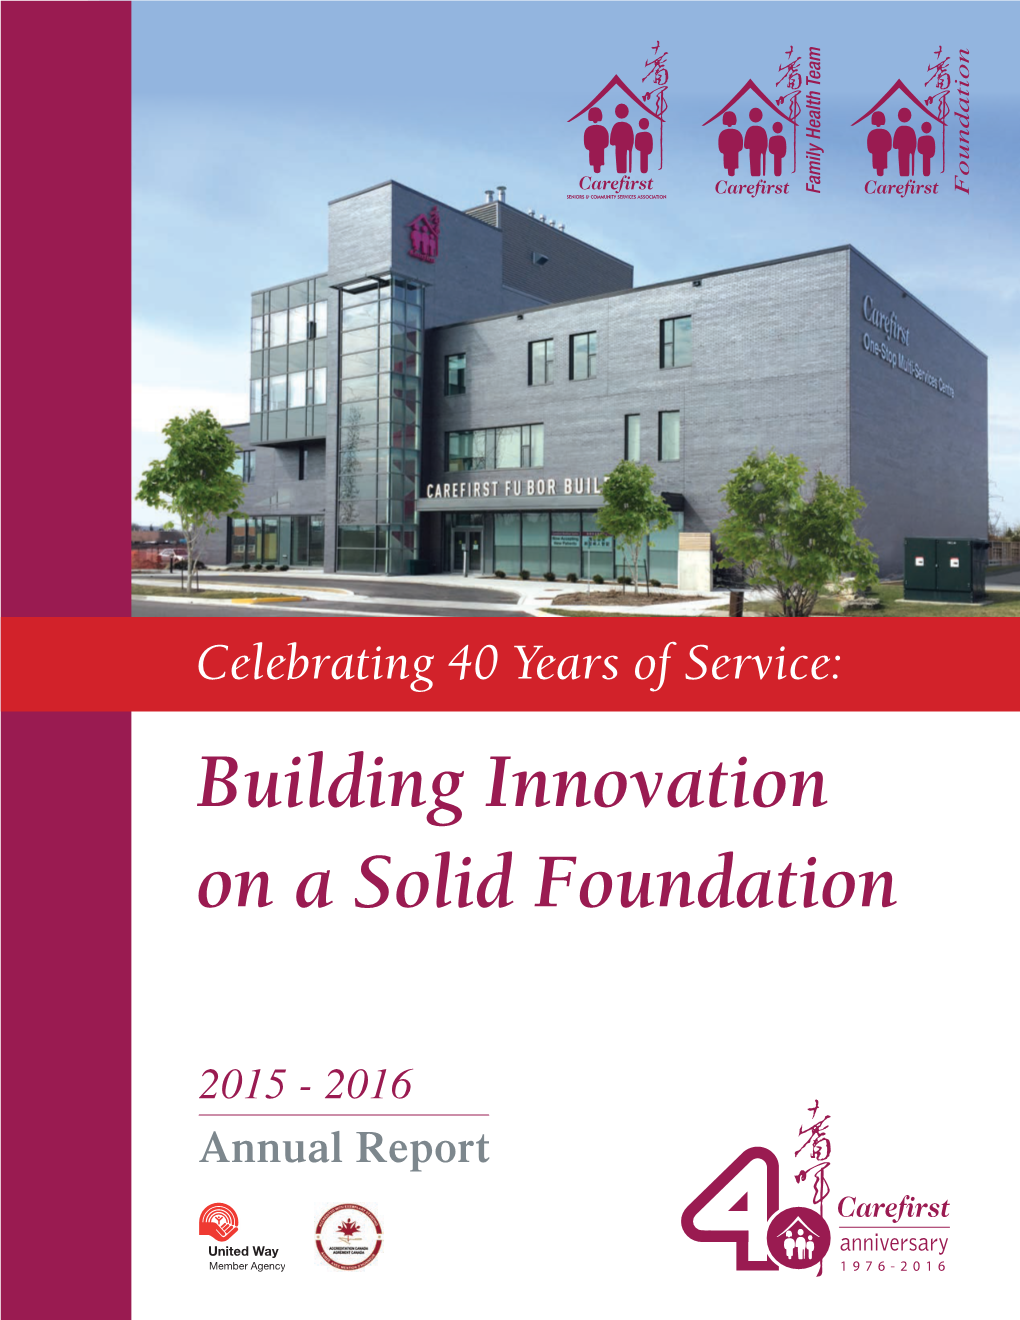 Building Innovation on a Solid Foundation